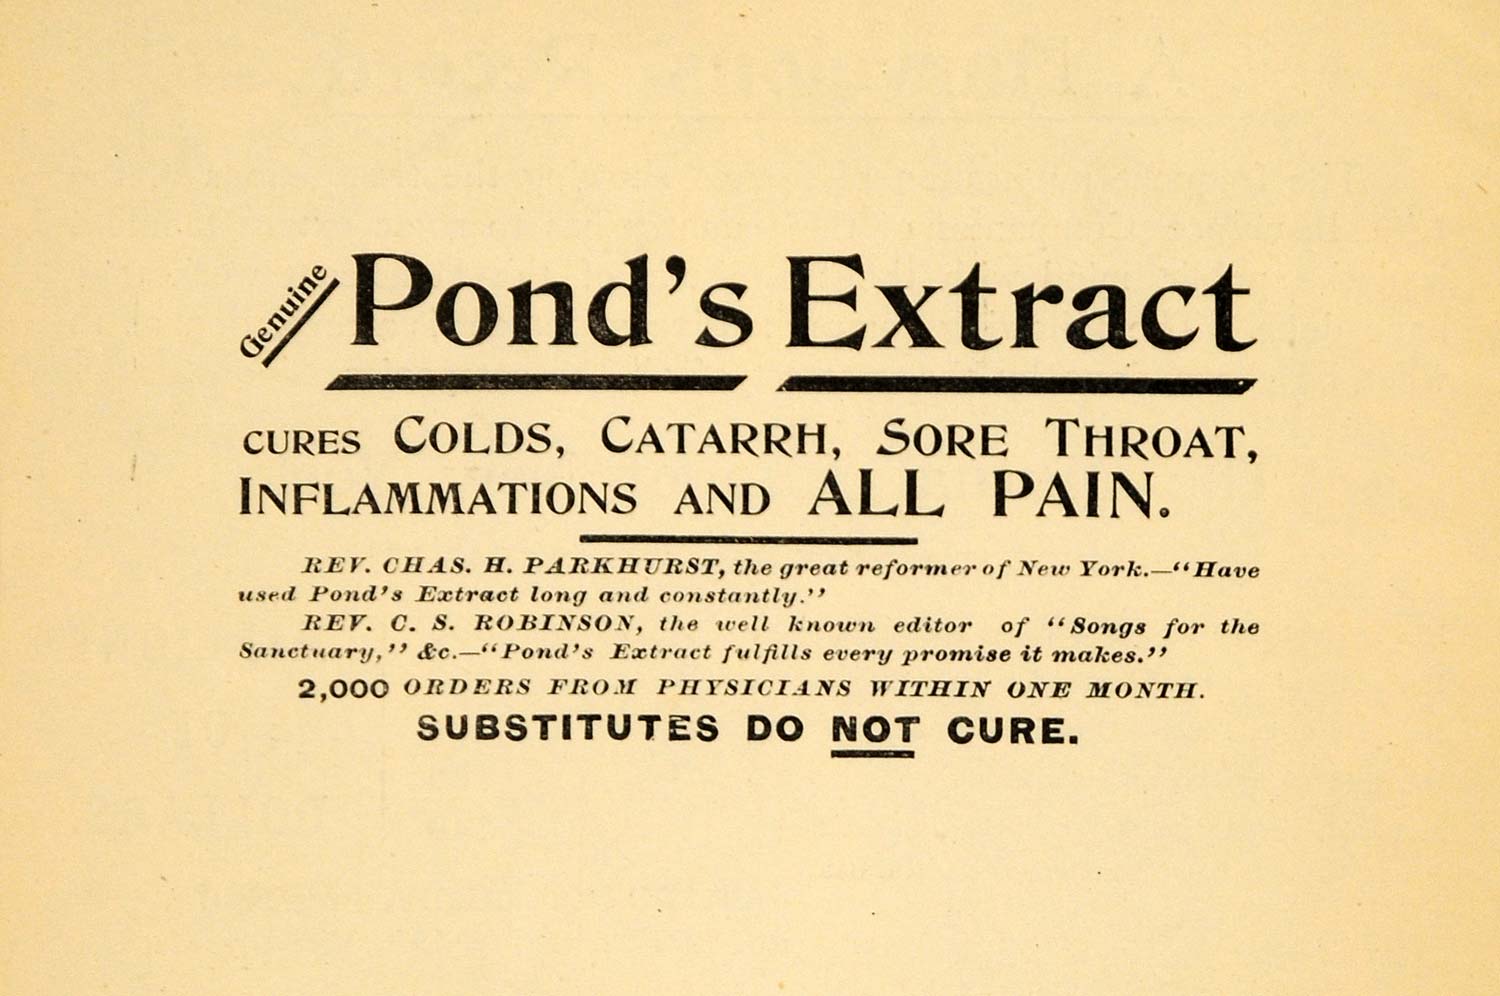 1895 Ad Pond's Extract Medicine Cold Catarrh Pain Cure - ORIGINAL TFO1